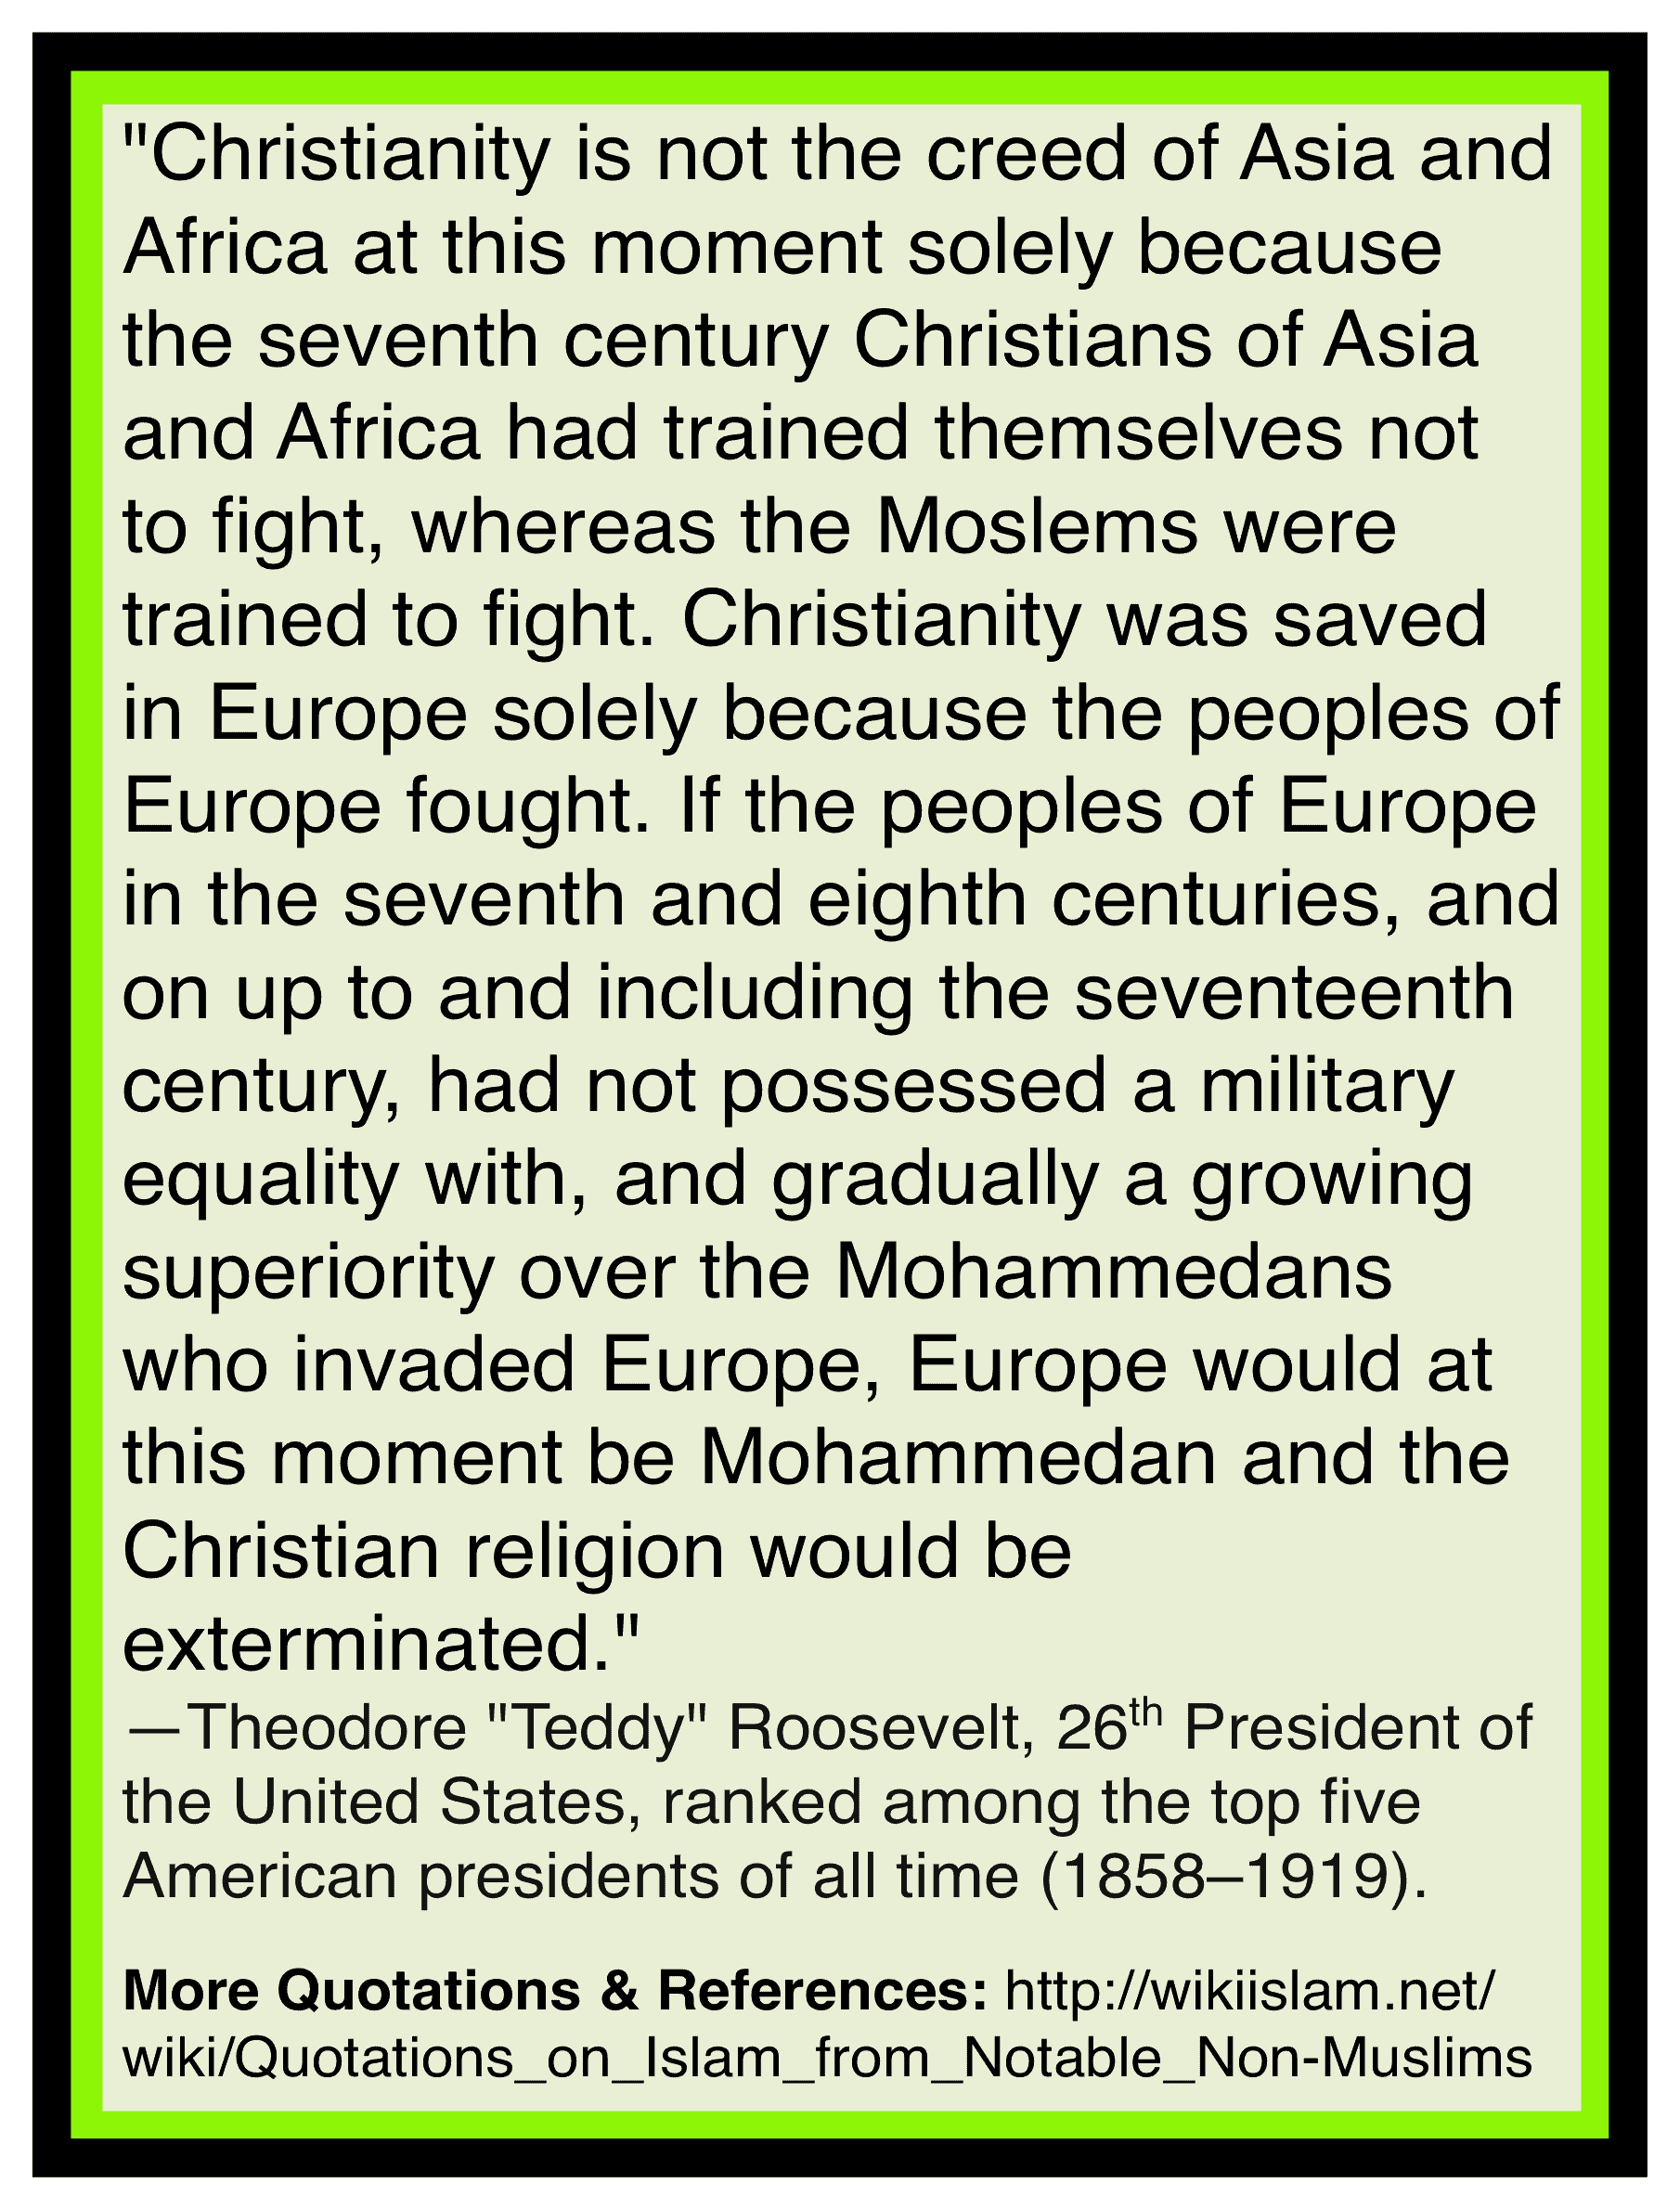 Islam must be fought